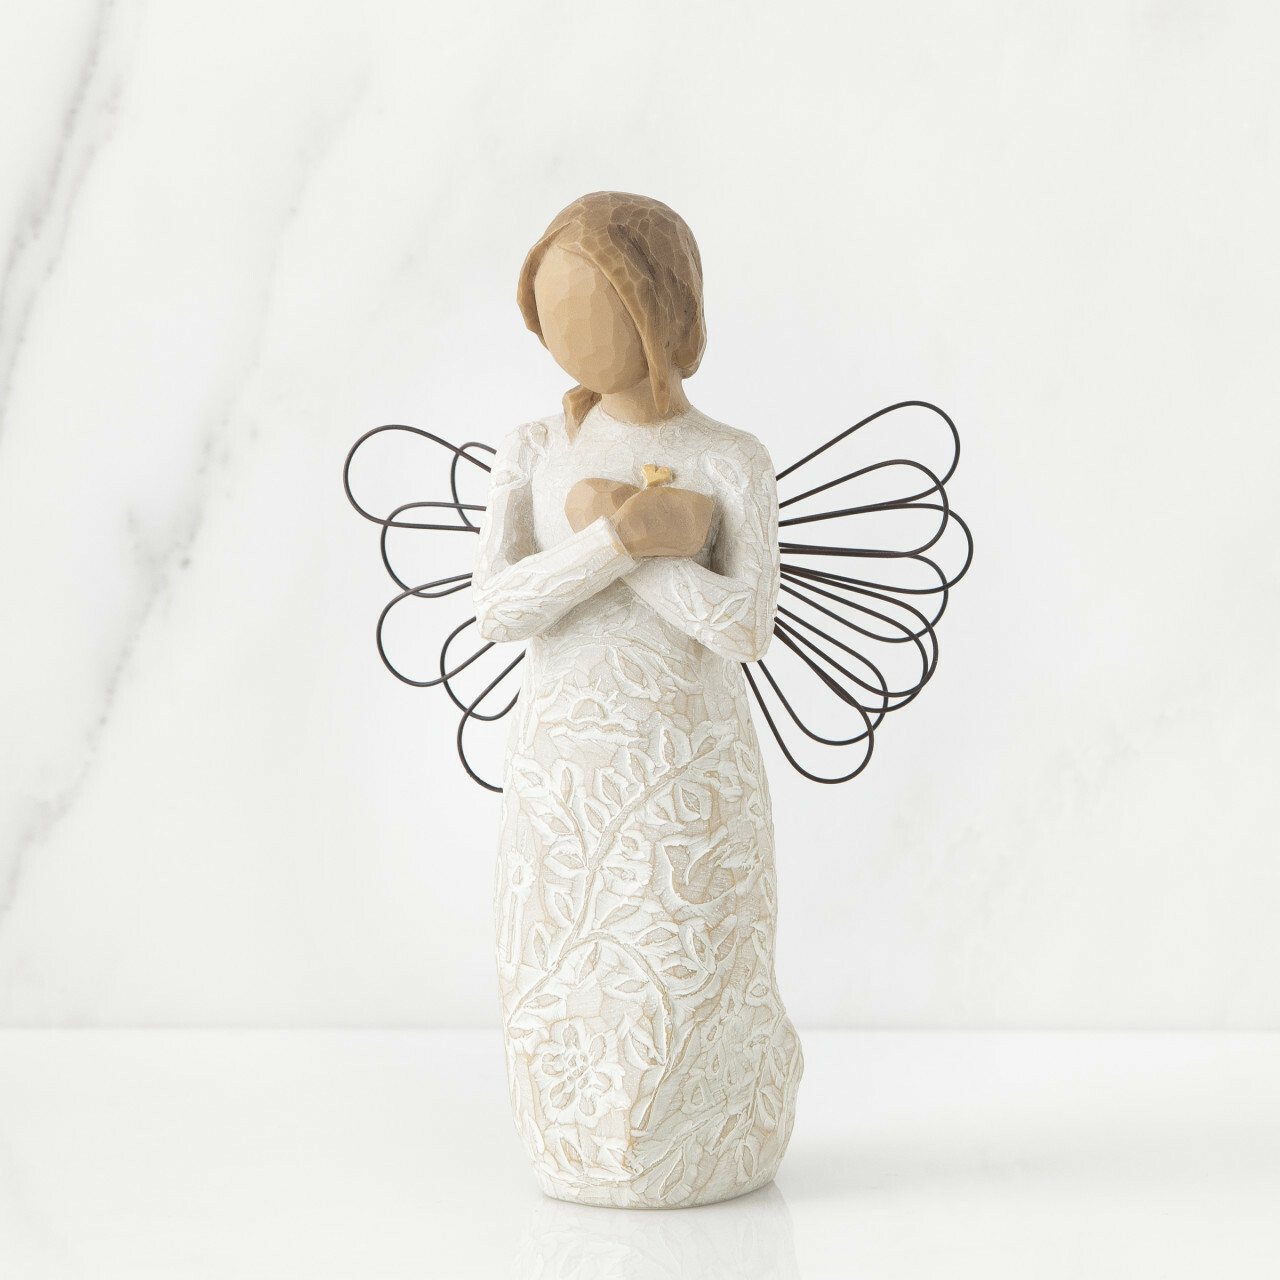 Event Plushies Creative Angel Statue Blessing Box - Perfect Holiday Gift Idea